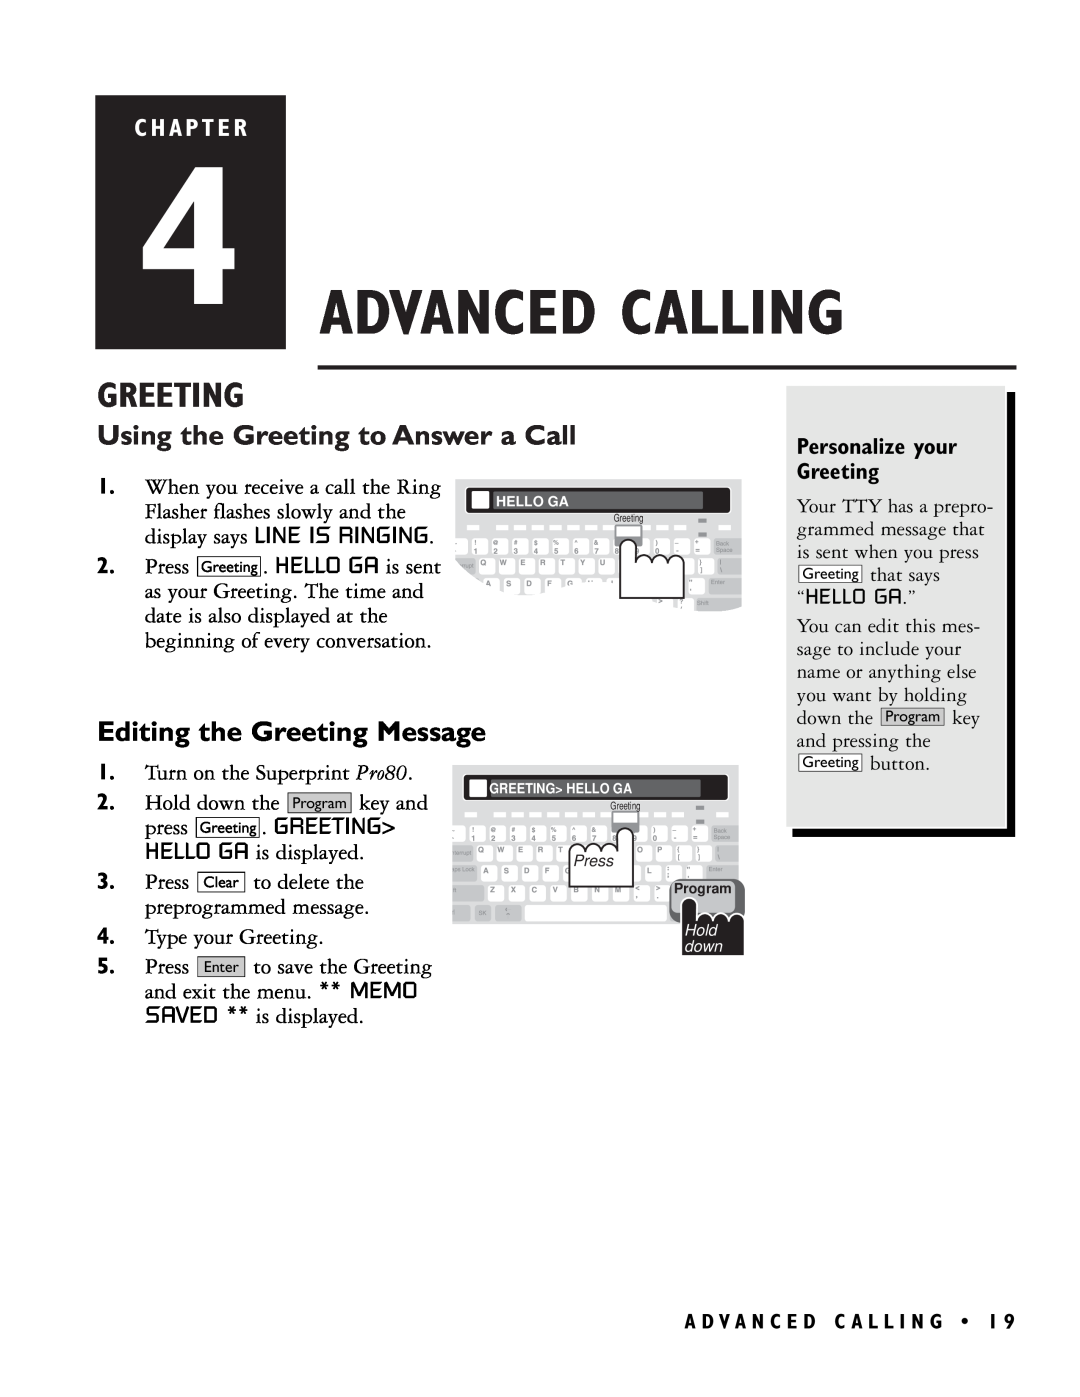 Ultratec PRO80TM Advanced Calling, Using the Greeting to Answer a Call, Editing the Greeting Message, C H A P T E R 